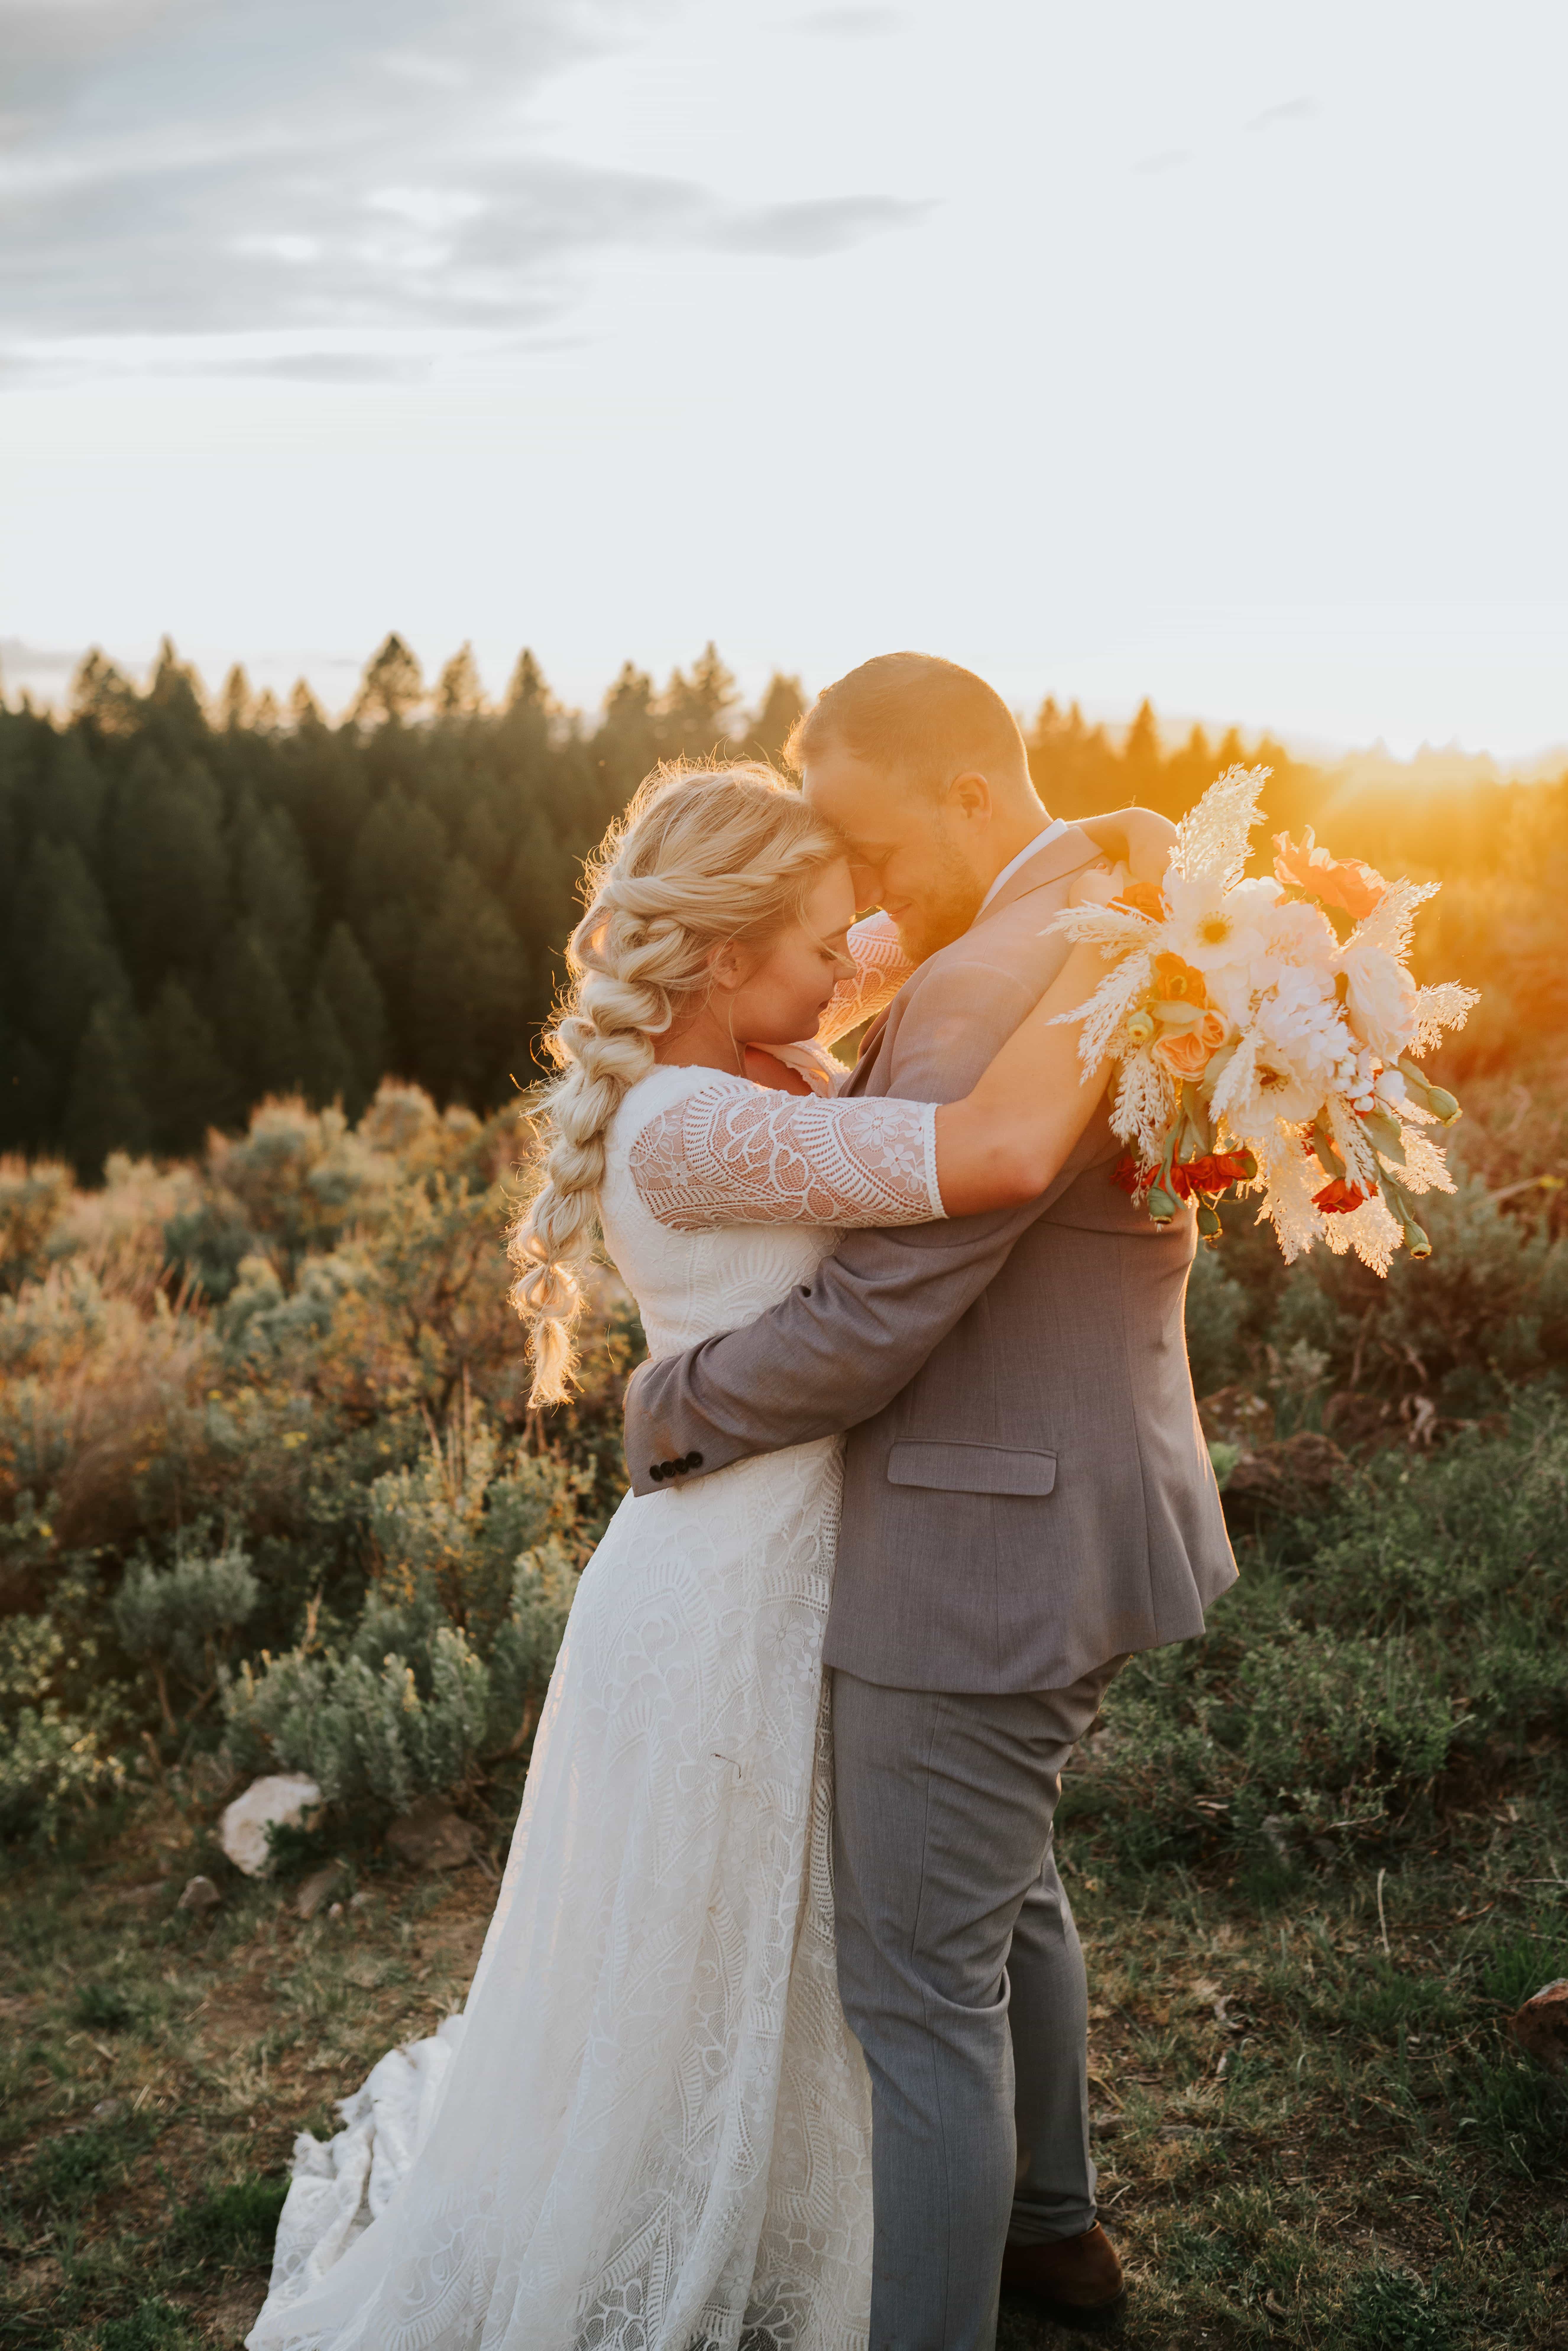 Sacramento wedding photographer captures bride and groom hugging in forest during budget friendly wedding day